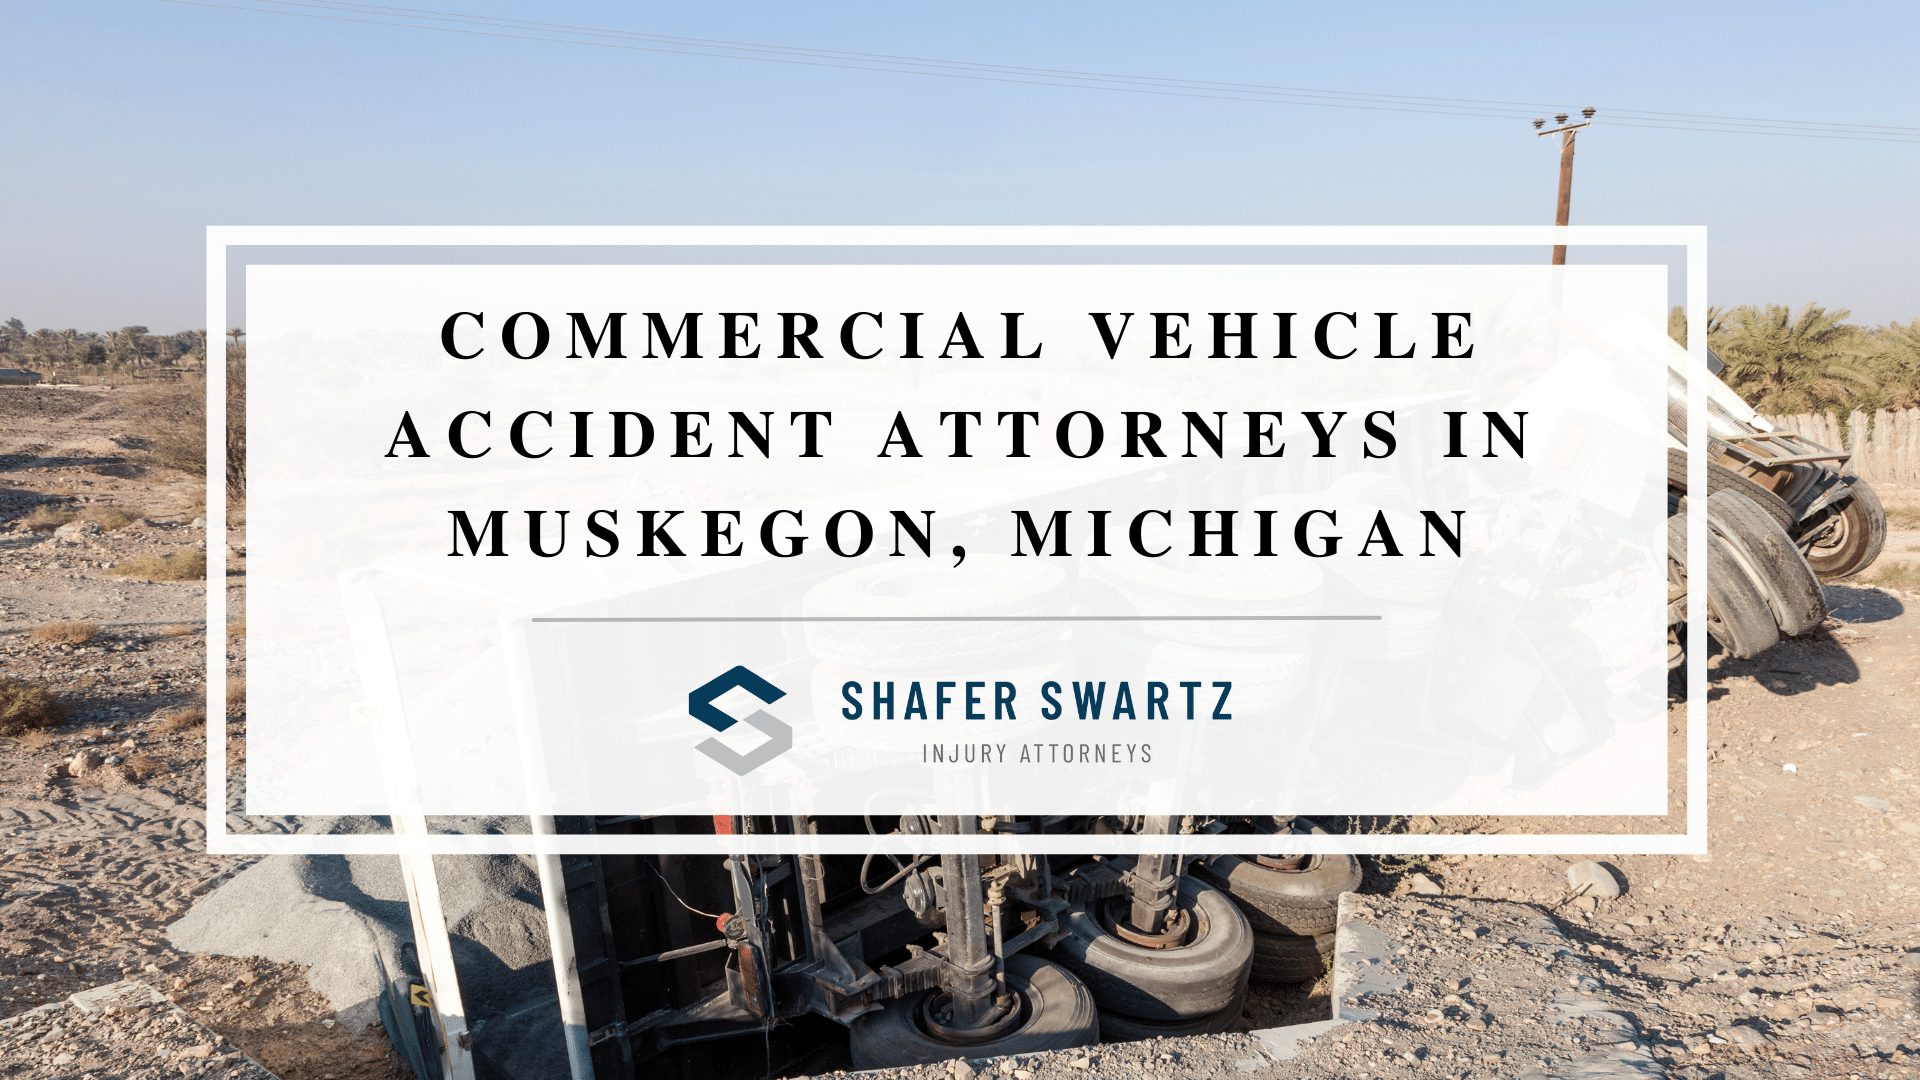 Featured image of Commercial Vehicle Accident Attorneys in Muskegon, Michigan